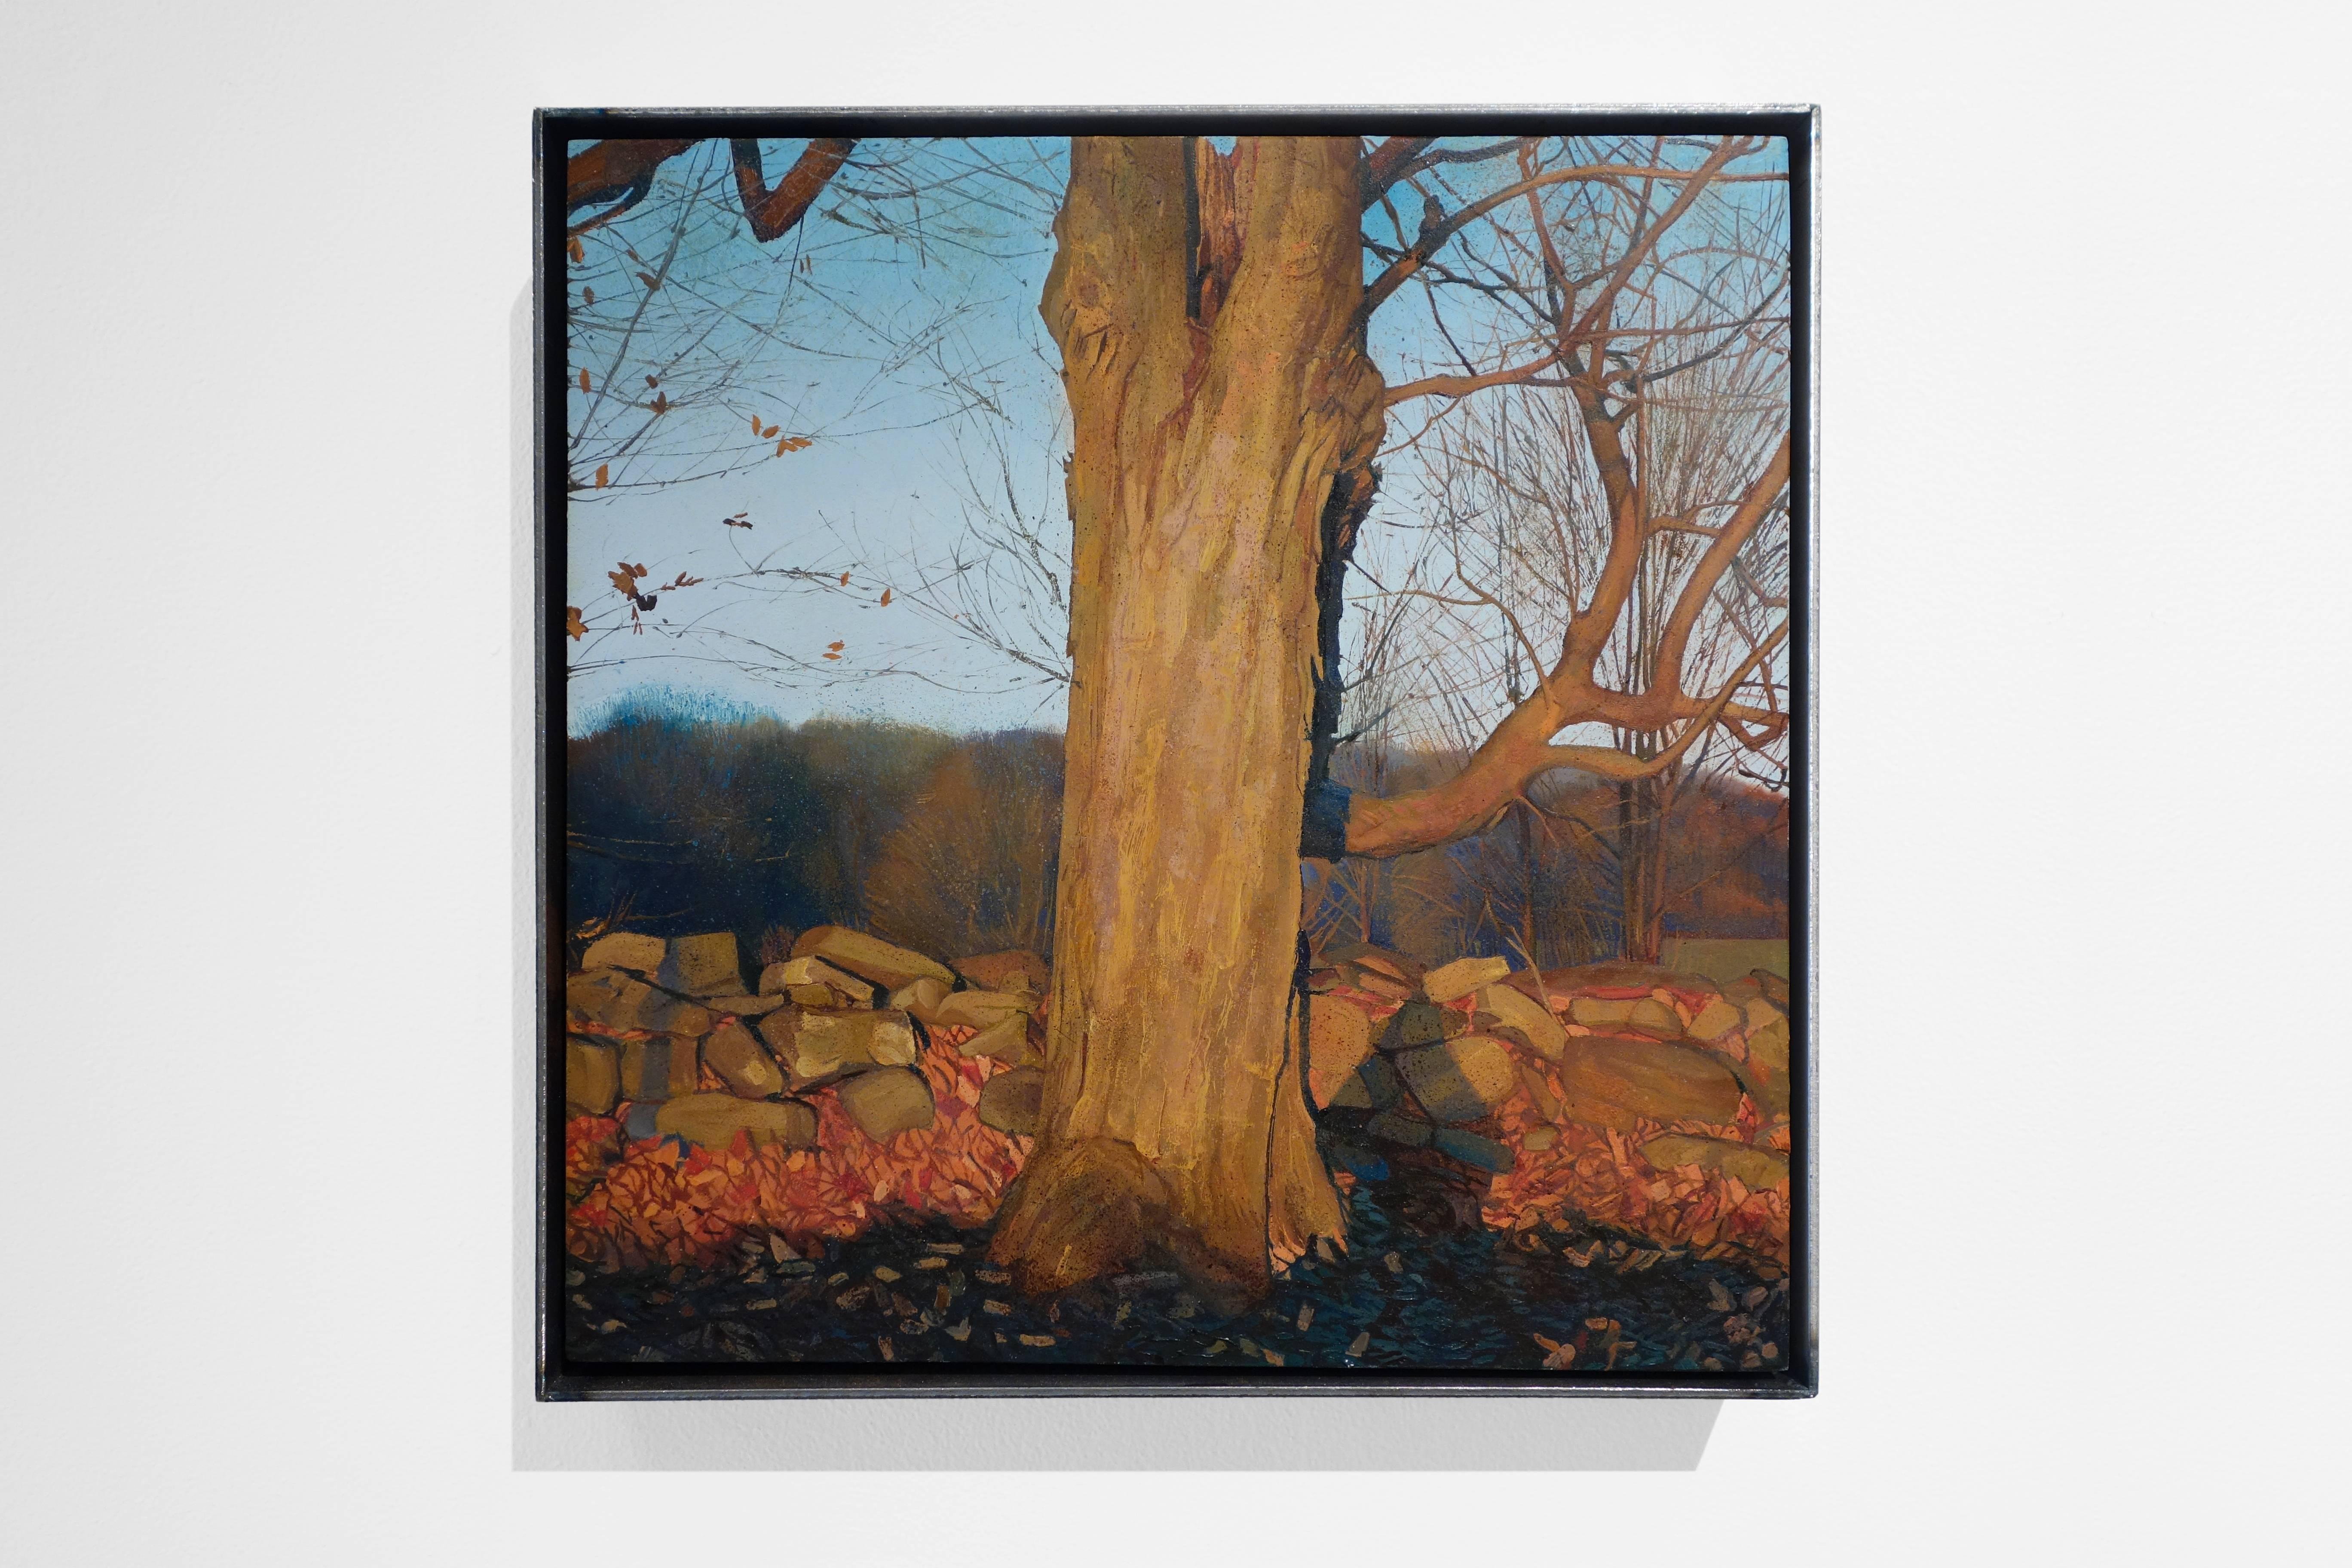 TREES ON A LINE #140, tree against stone wall, country, winter time - Painting by Trey Friedman